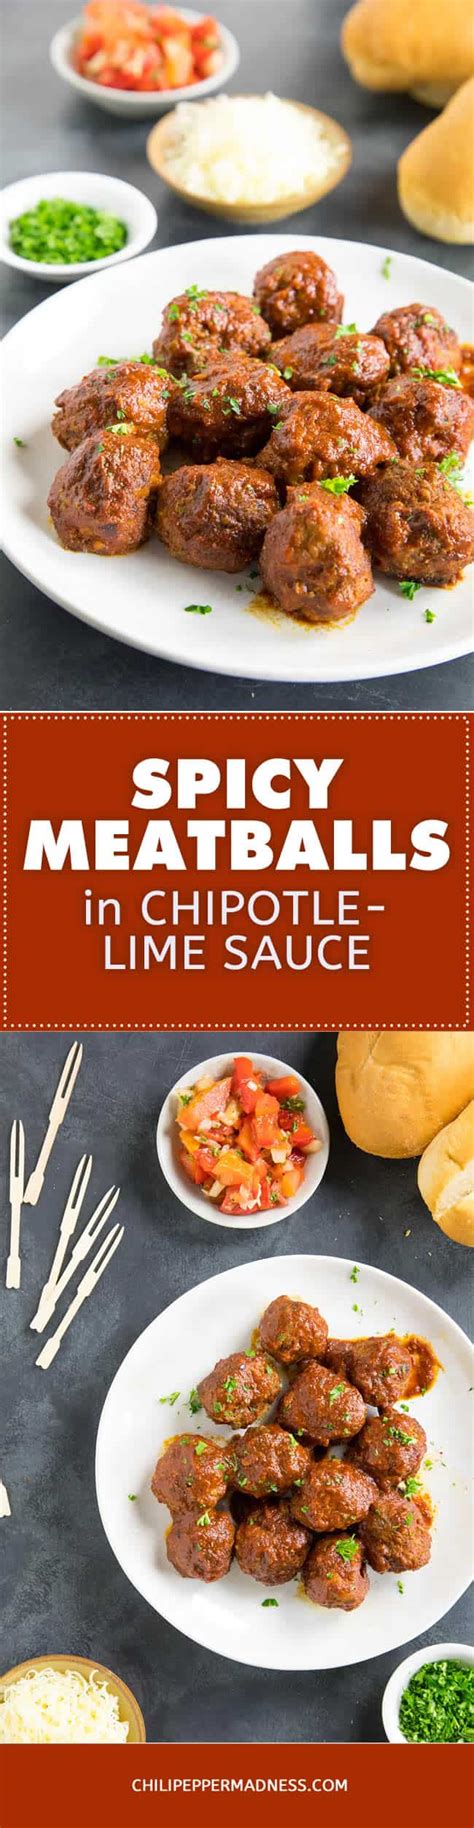 spicy-meatballs-in-chipotle-lime-sauce-recipe-chili image